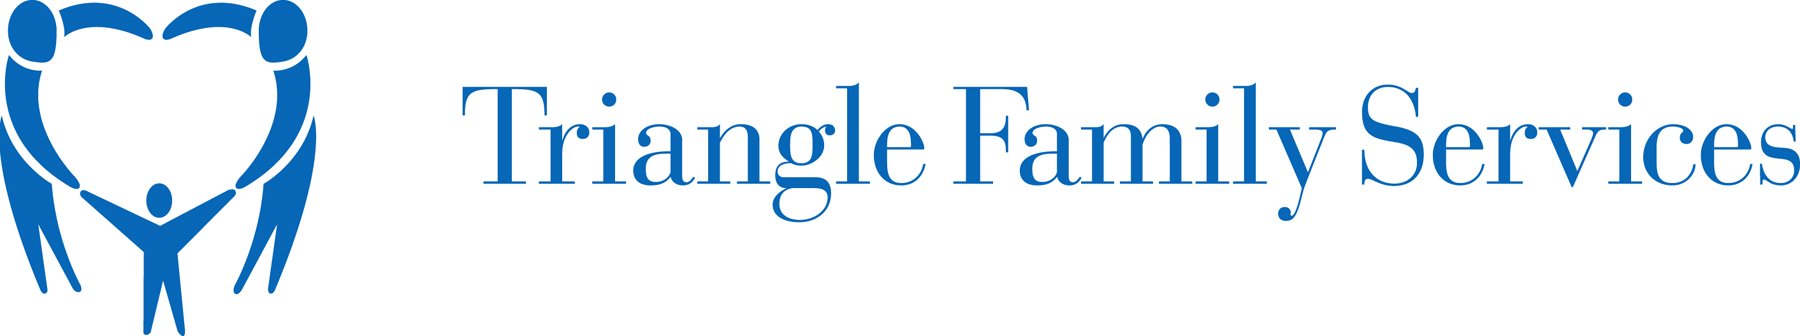 Triangle Family Services.jpeg